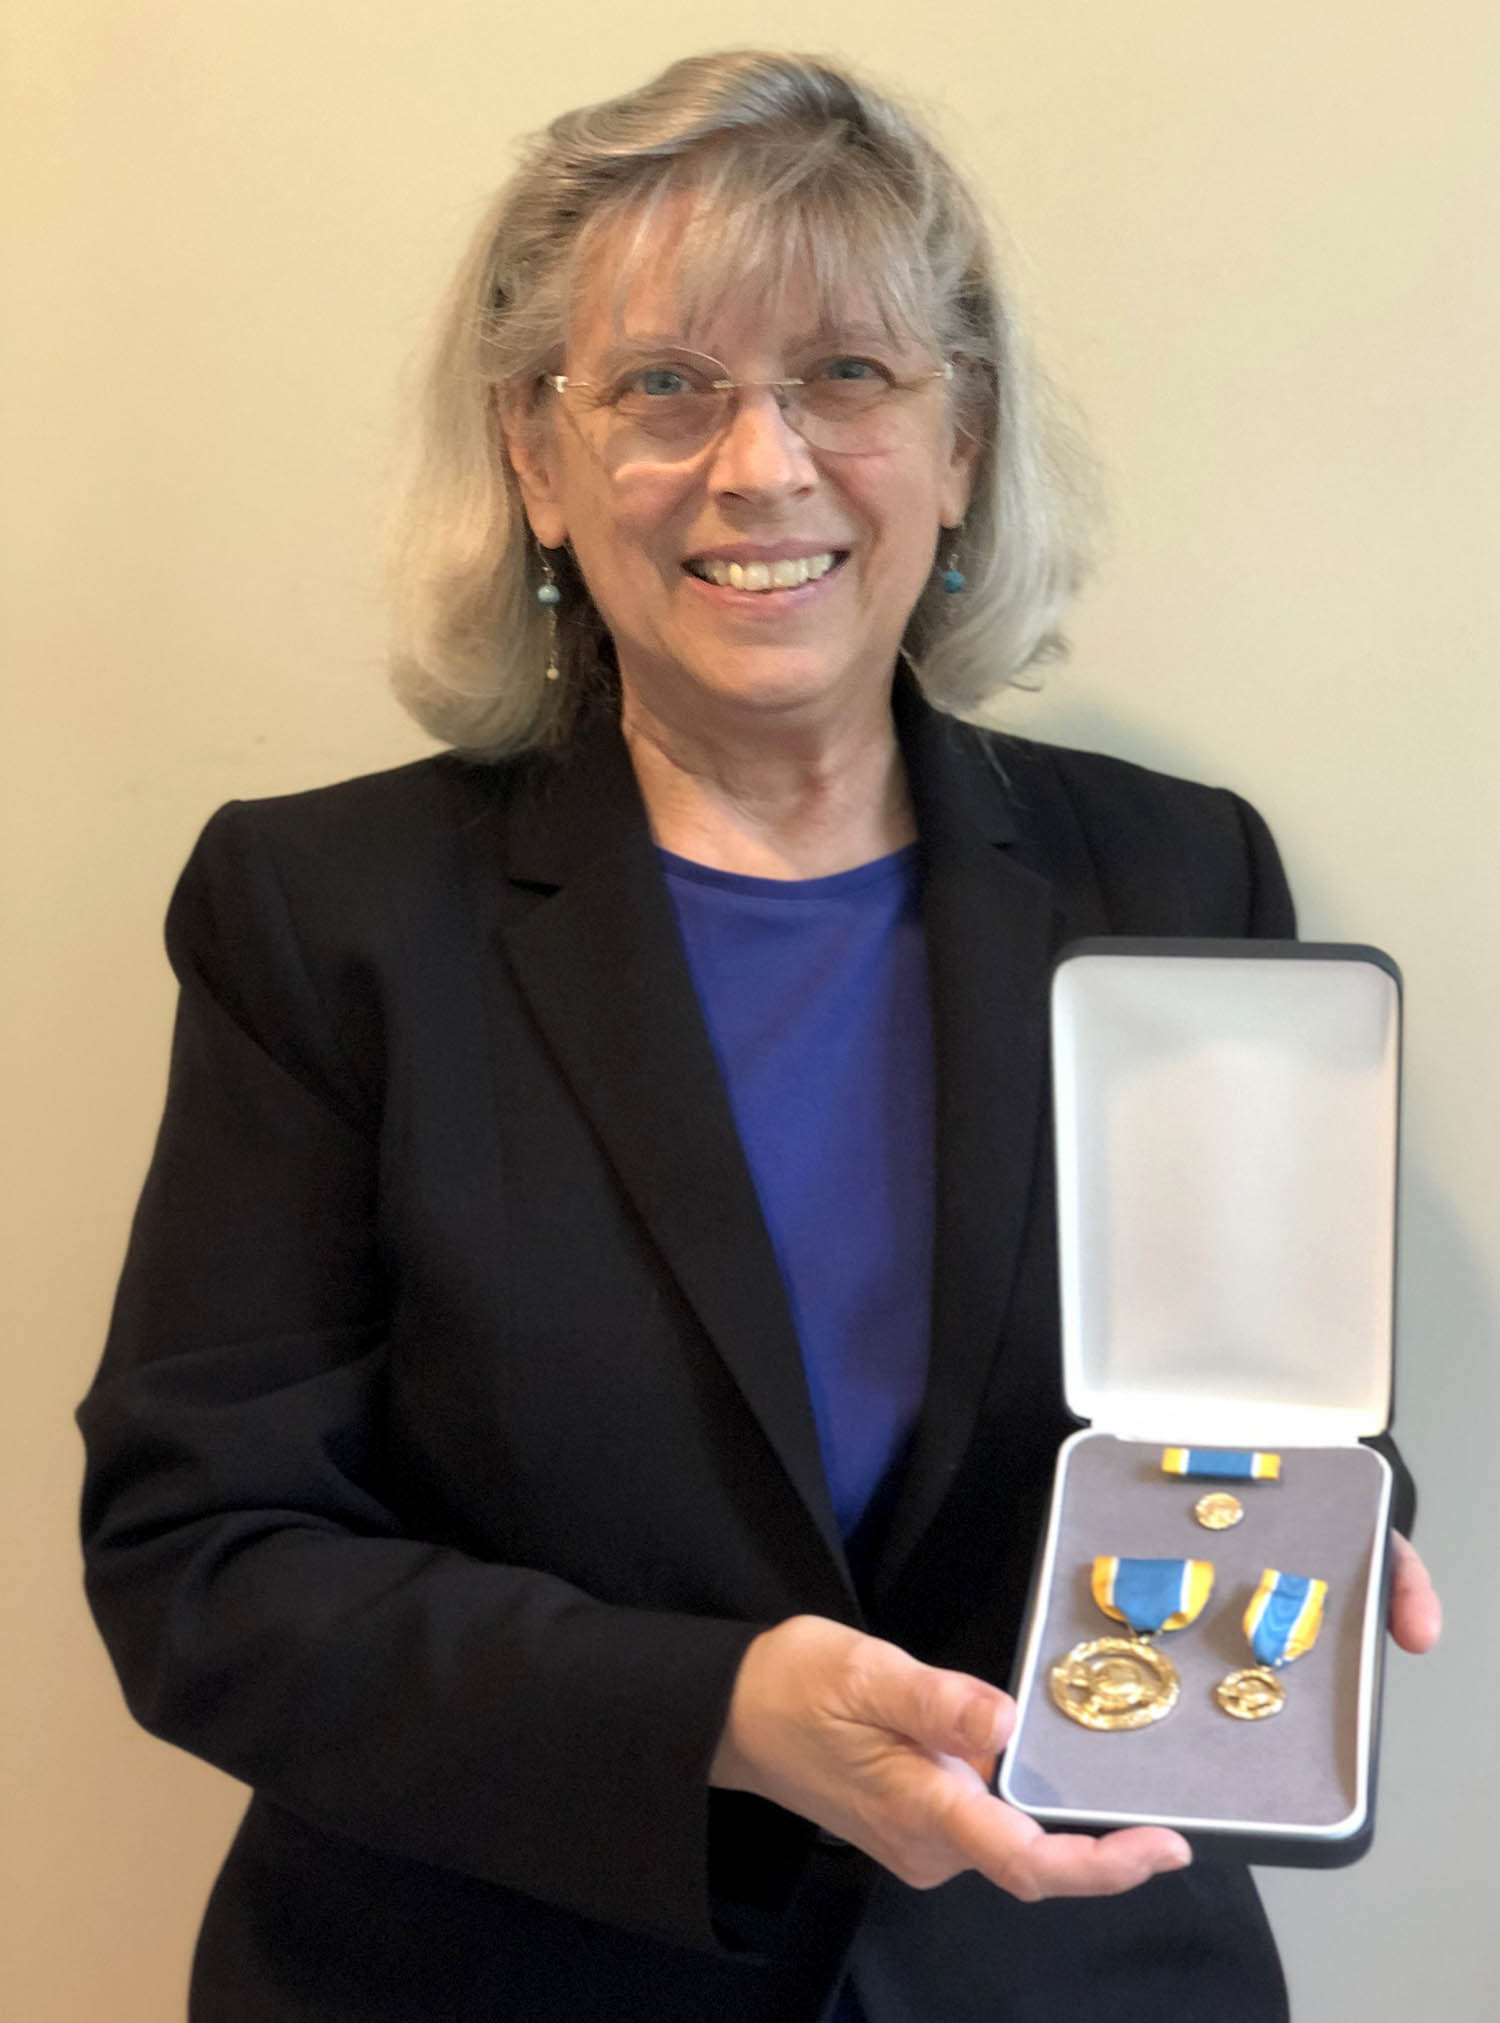 Dr. Heidi Hammel smiling and holding her medals from NASA in an open box.